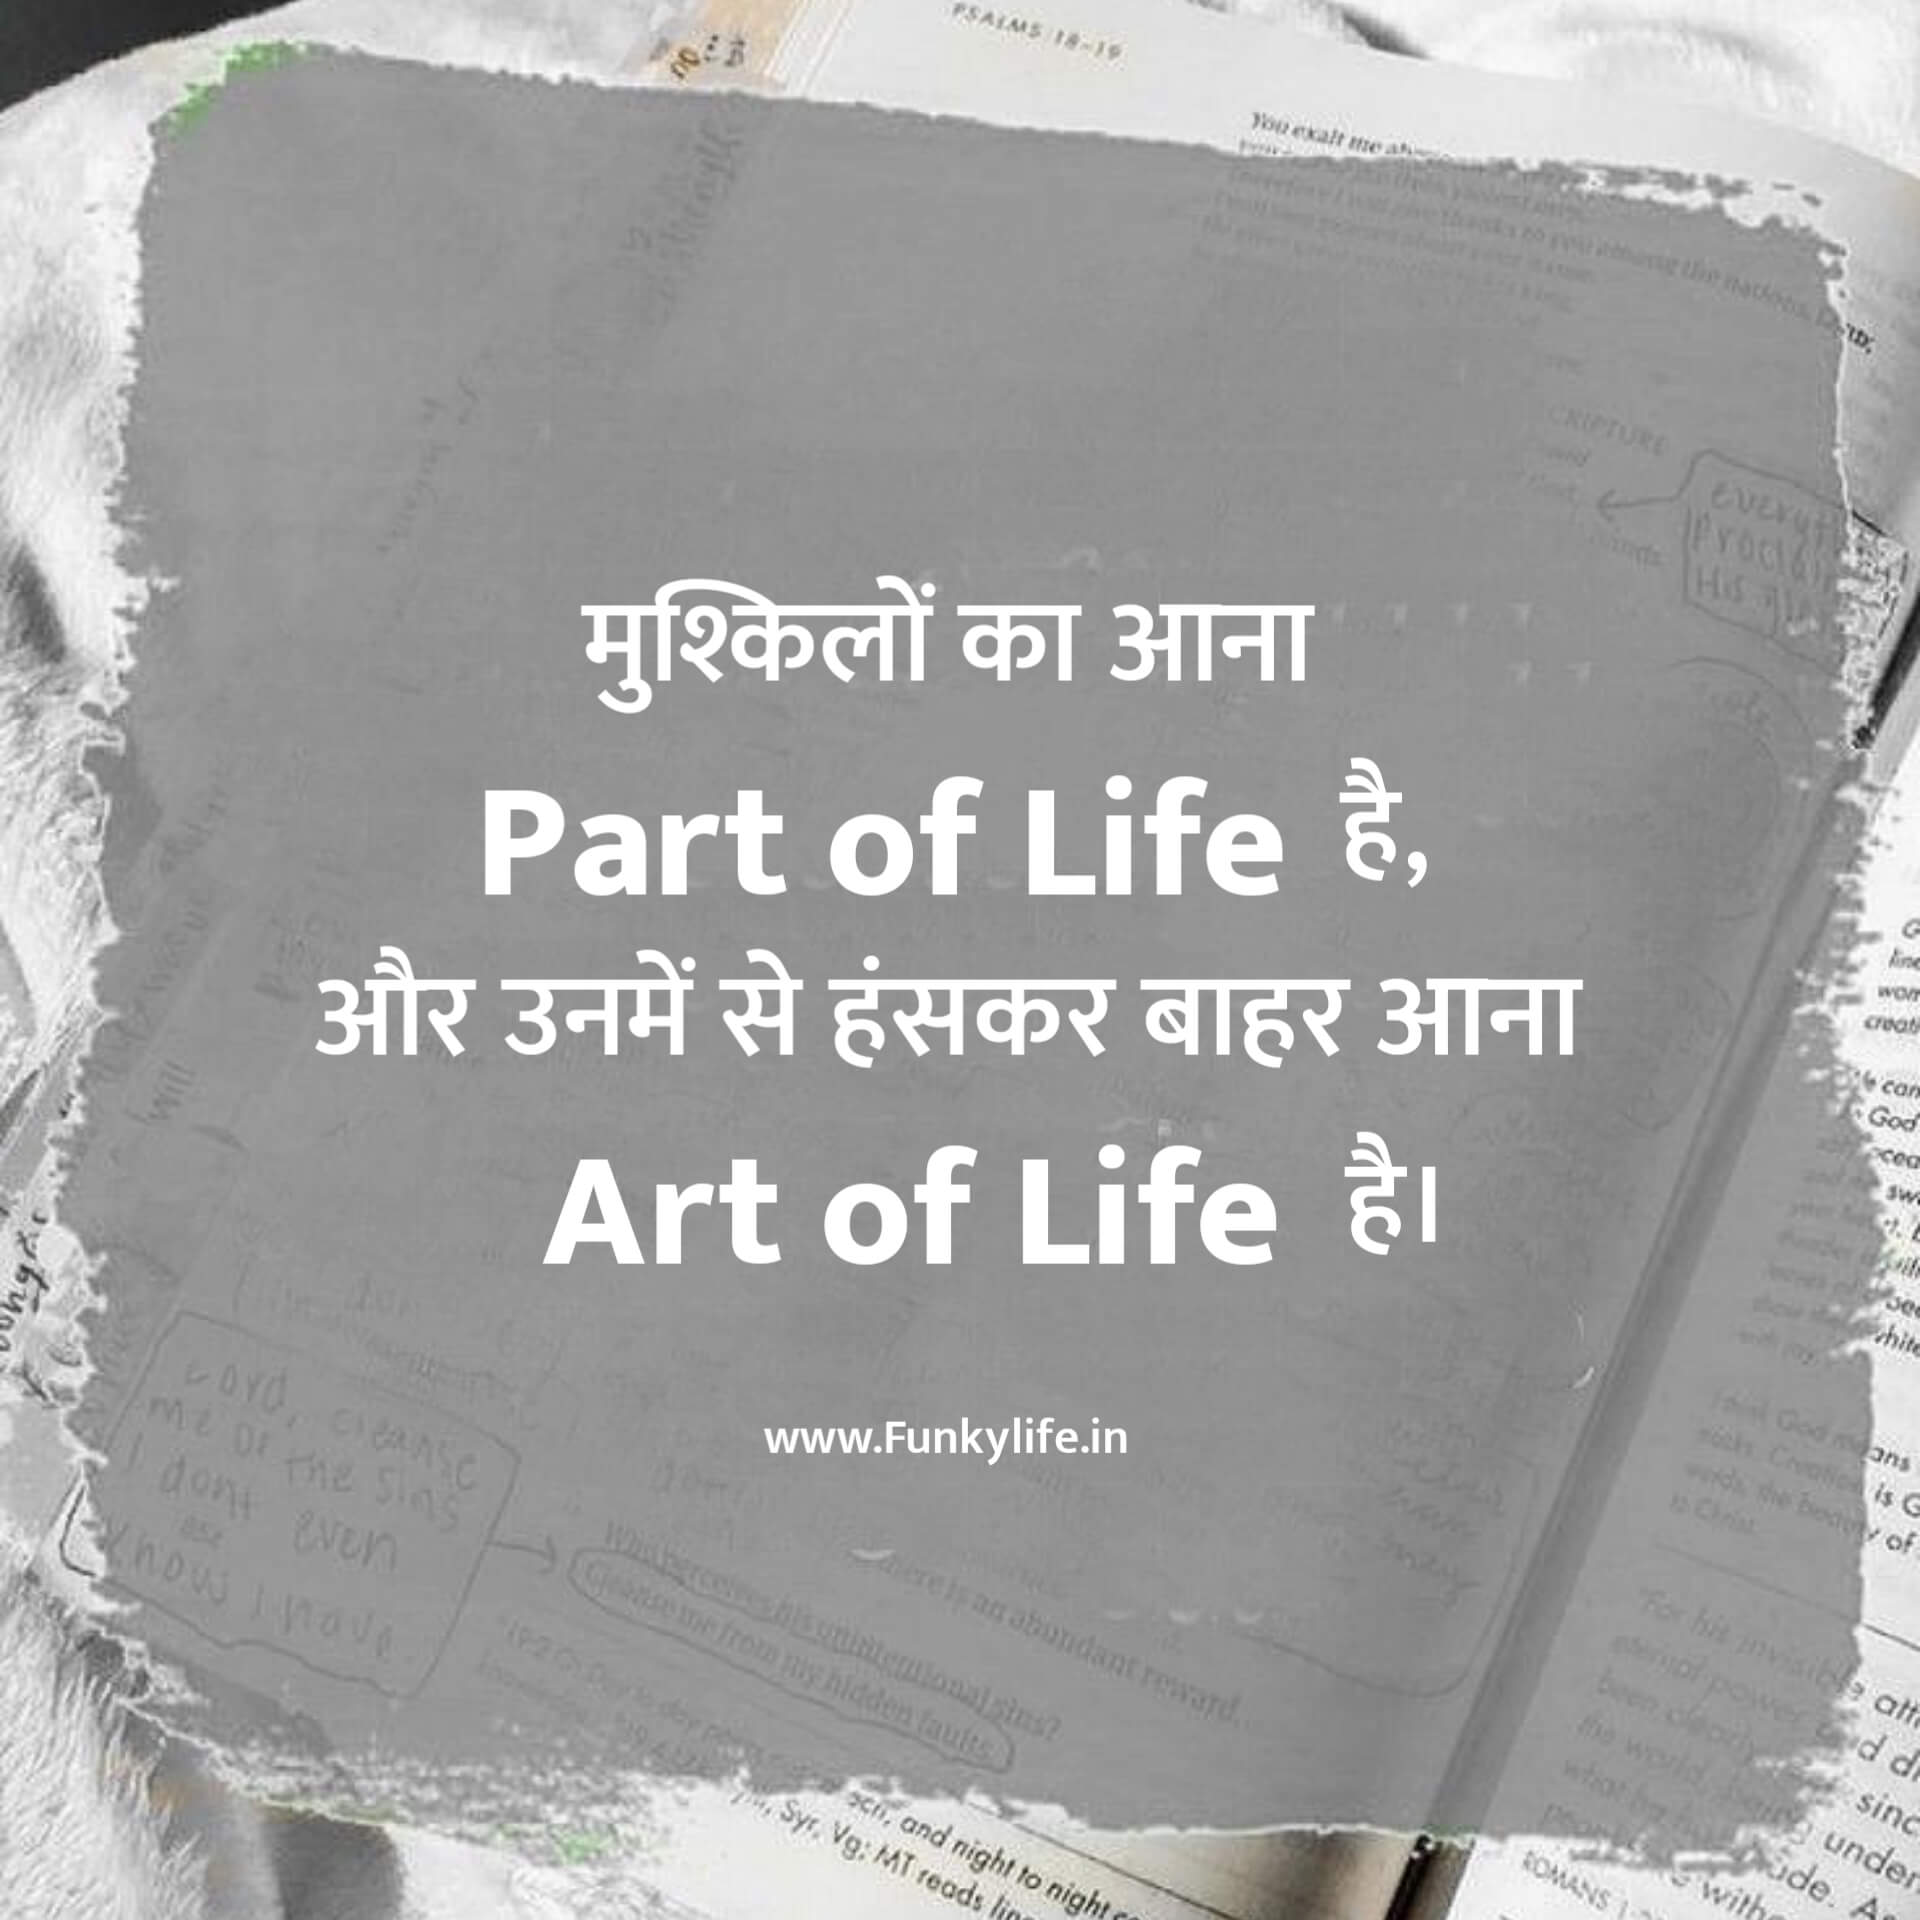 Positive Life Quotes in Hindi